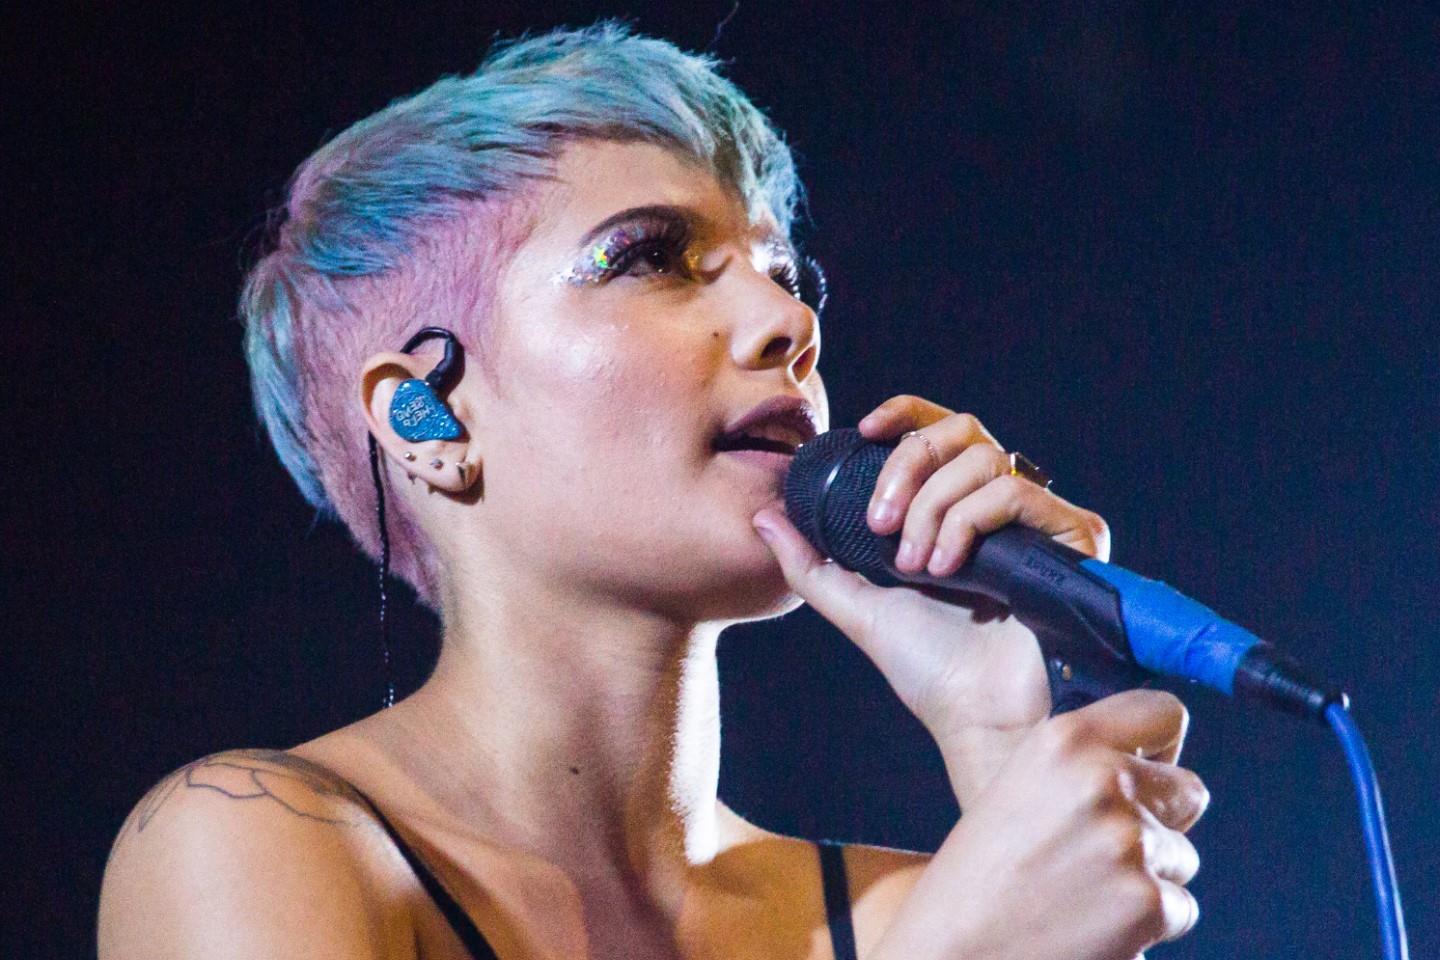 will halsey tour in 2023